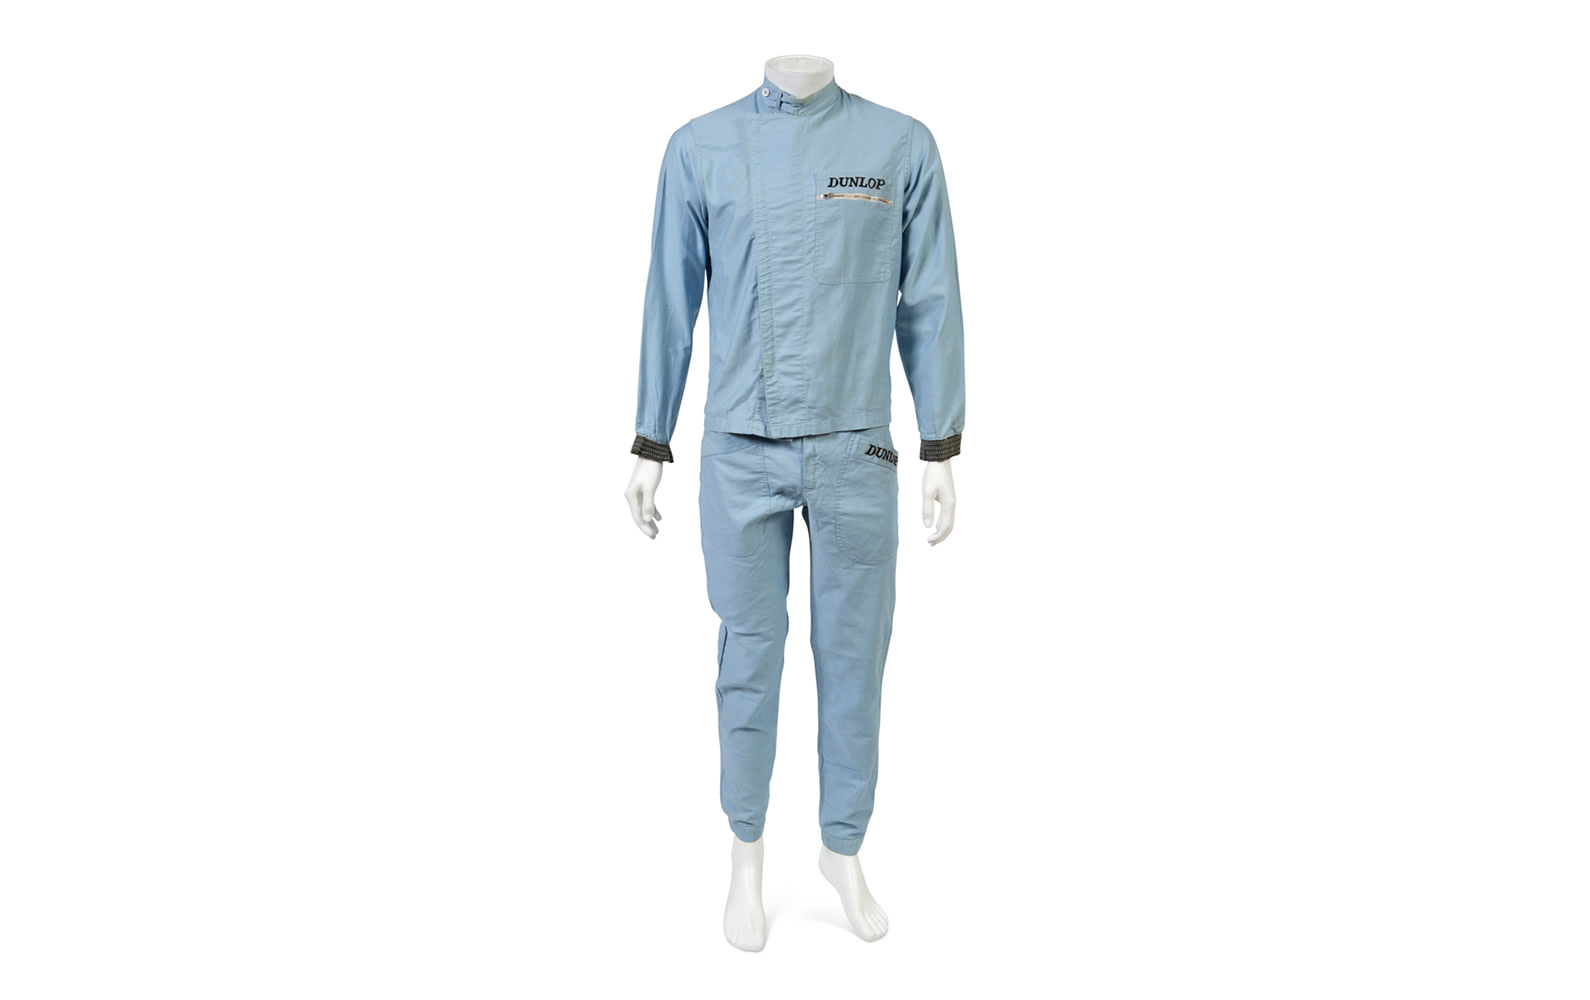 Two-Piece Les Leston/Dunlop Driving Suit Worn by Phil Hill During his Racing Career